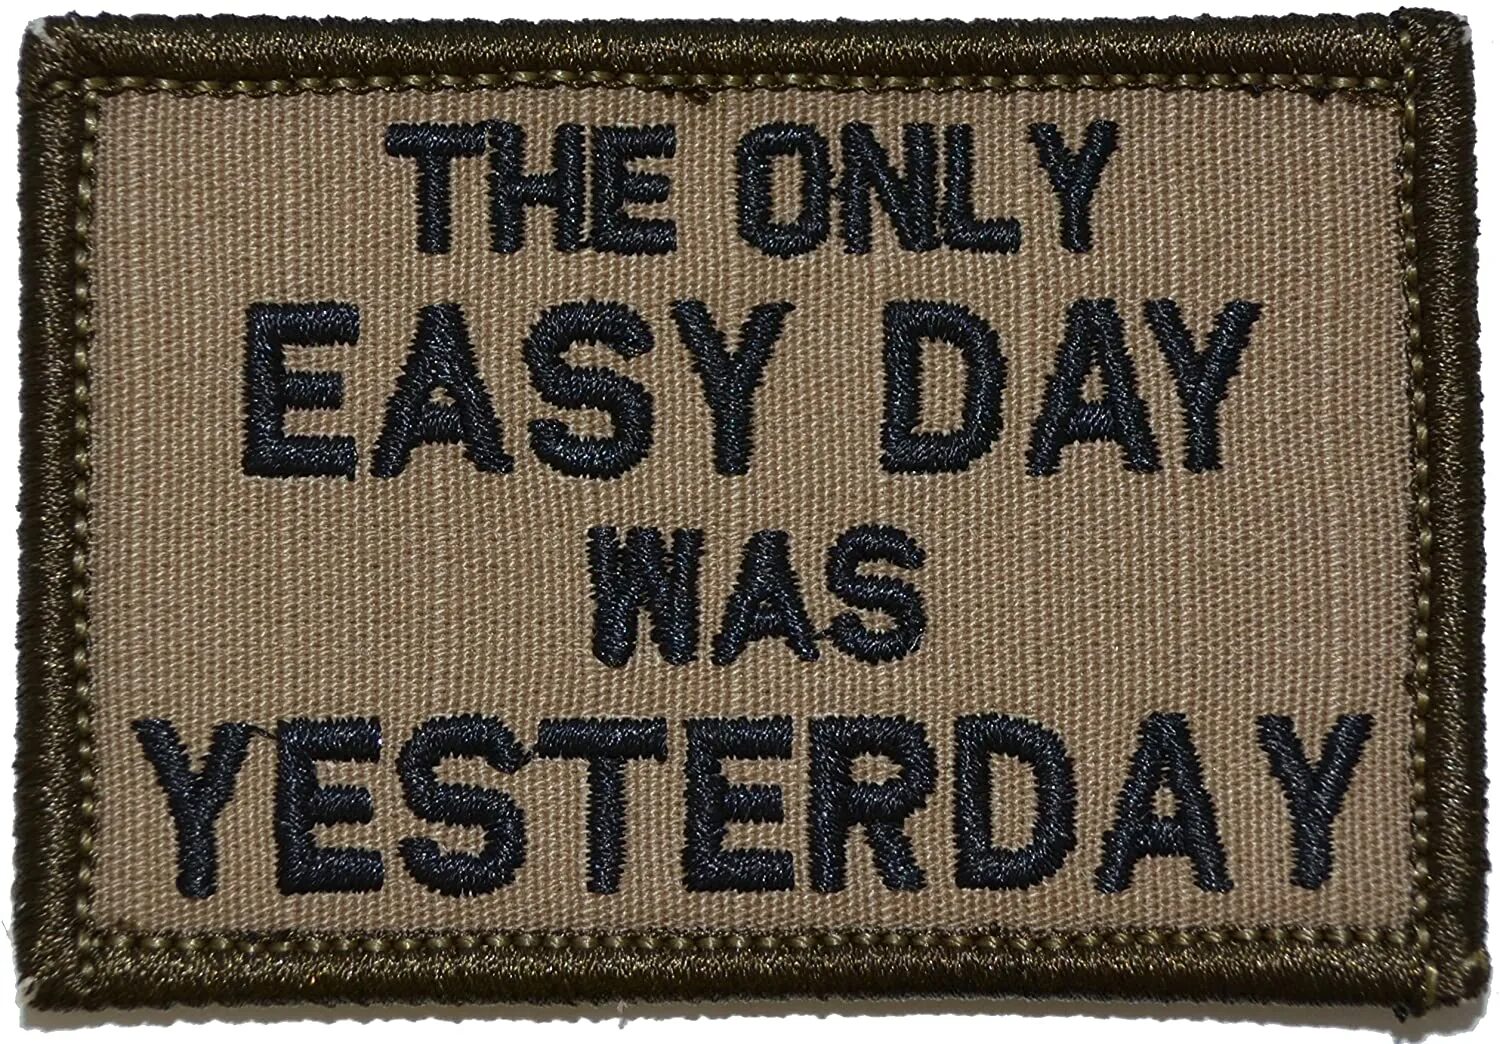 The only easy Day was yesterday. The easiest Day was yesterday. Only. Only Day.